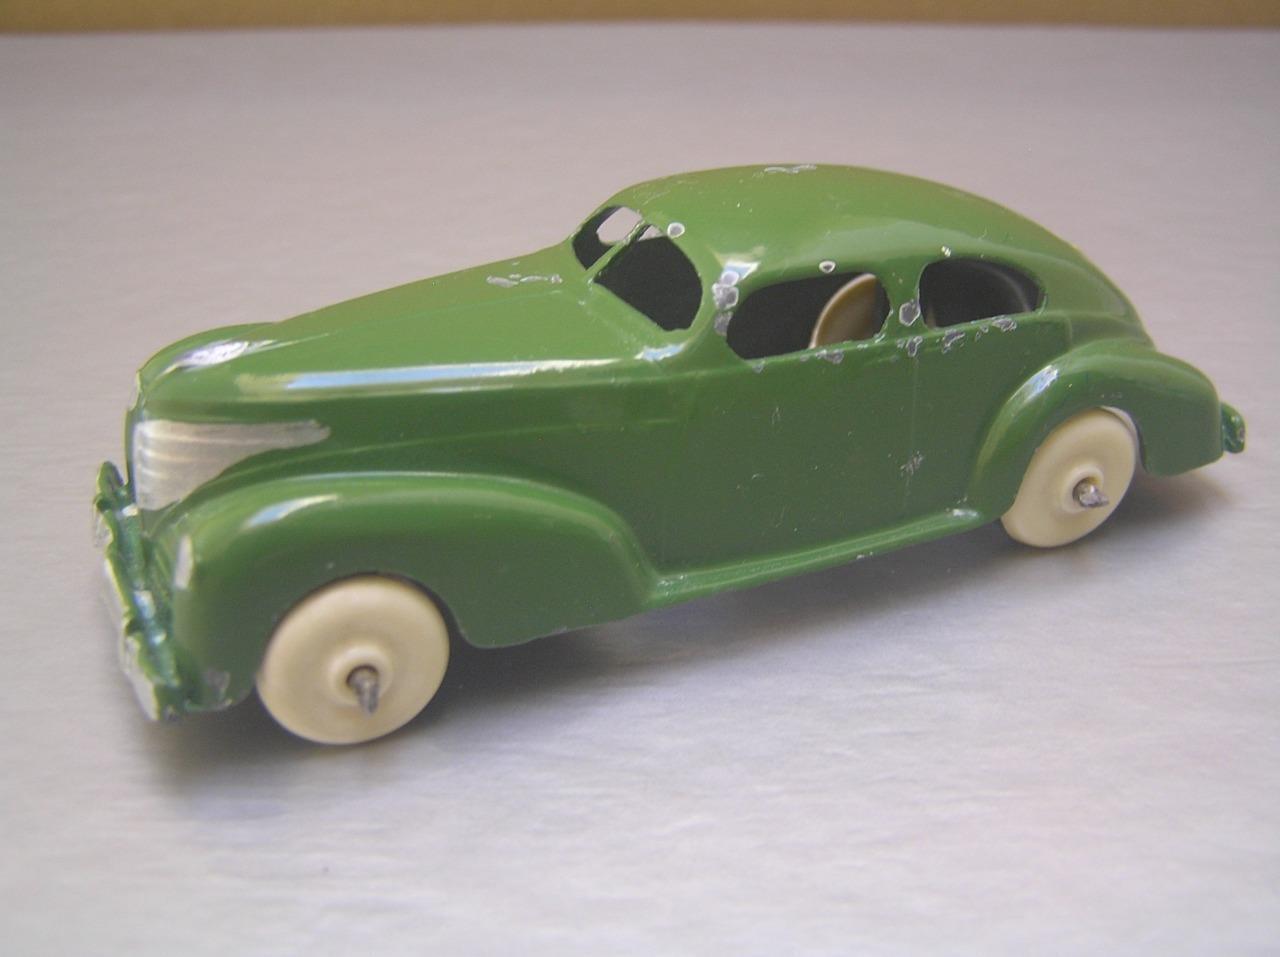 Gasquy Sep-toy Plymouth 1939 American Saloon made in Belgium scarce original toy